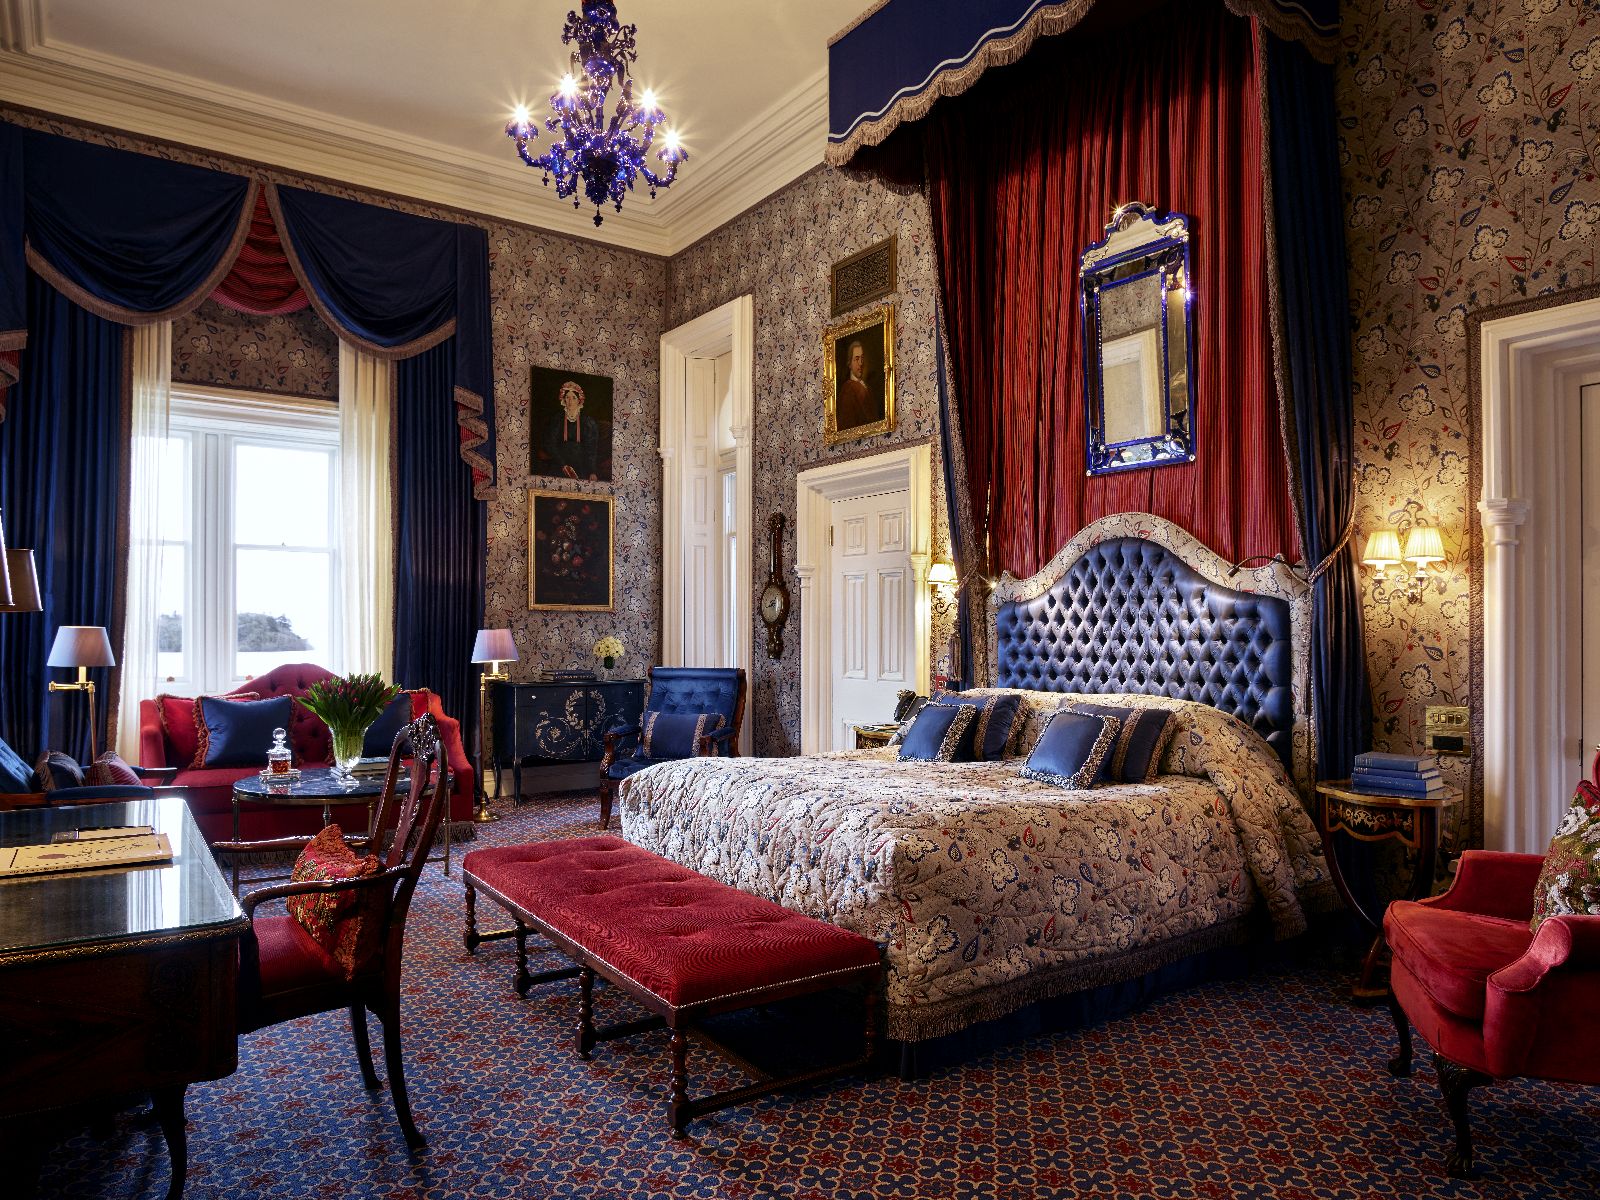 Junior State Room at Ashford Castle in County Mayo Ireland